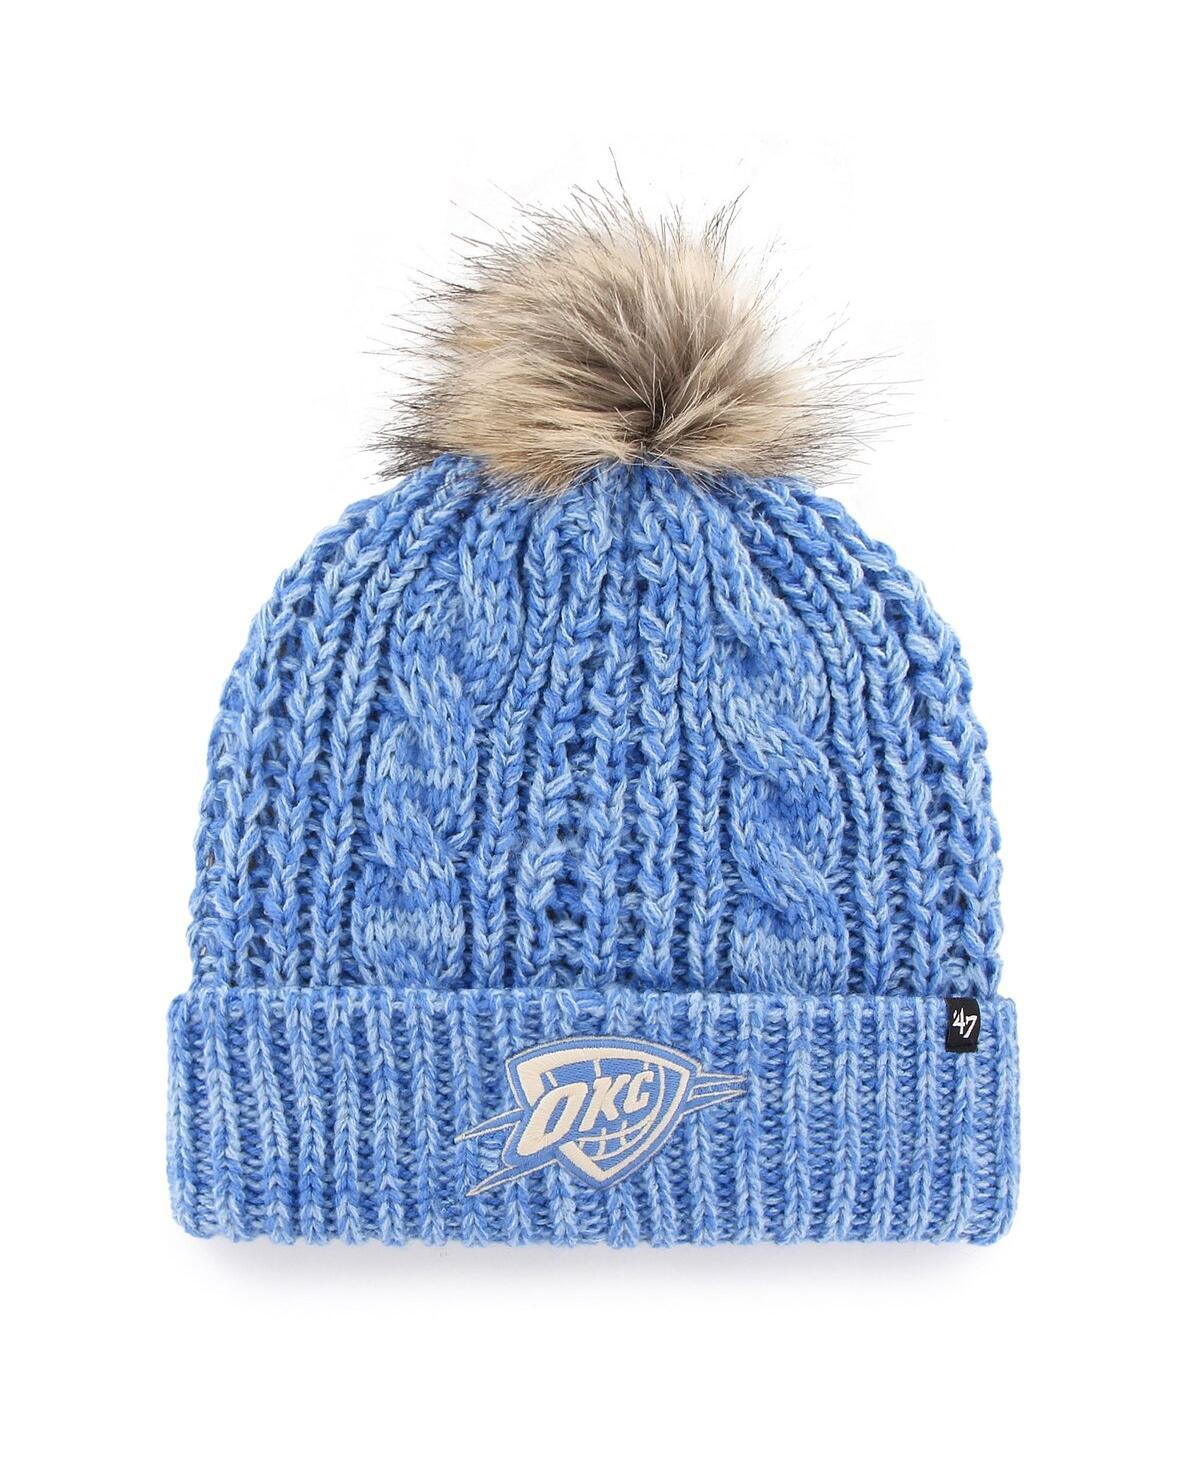 47 Teal Charlotte Hornets Meeko Cuffed Knit Hat with Pom